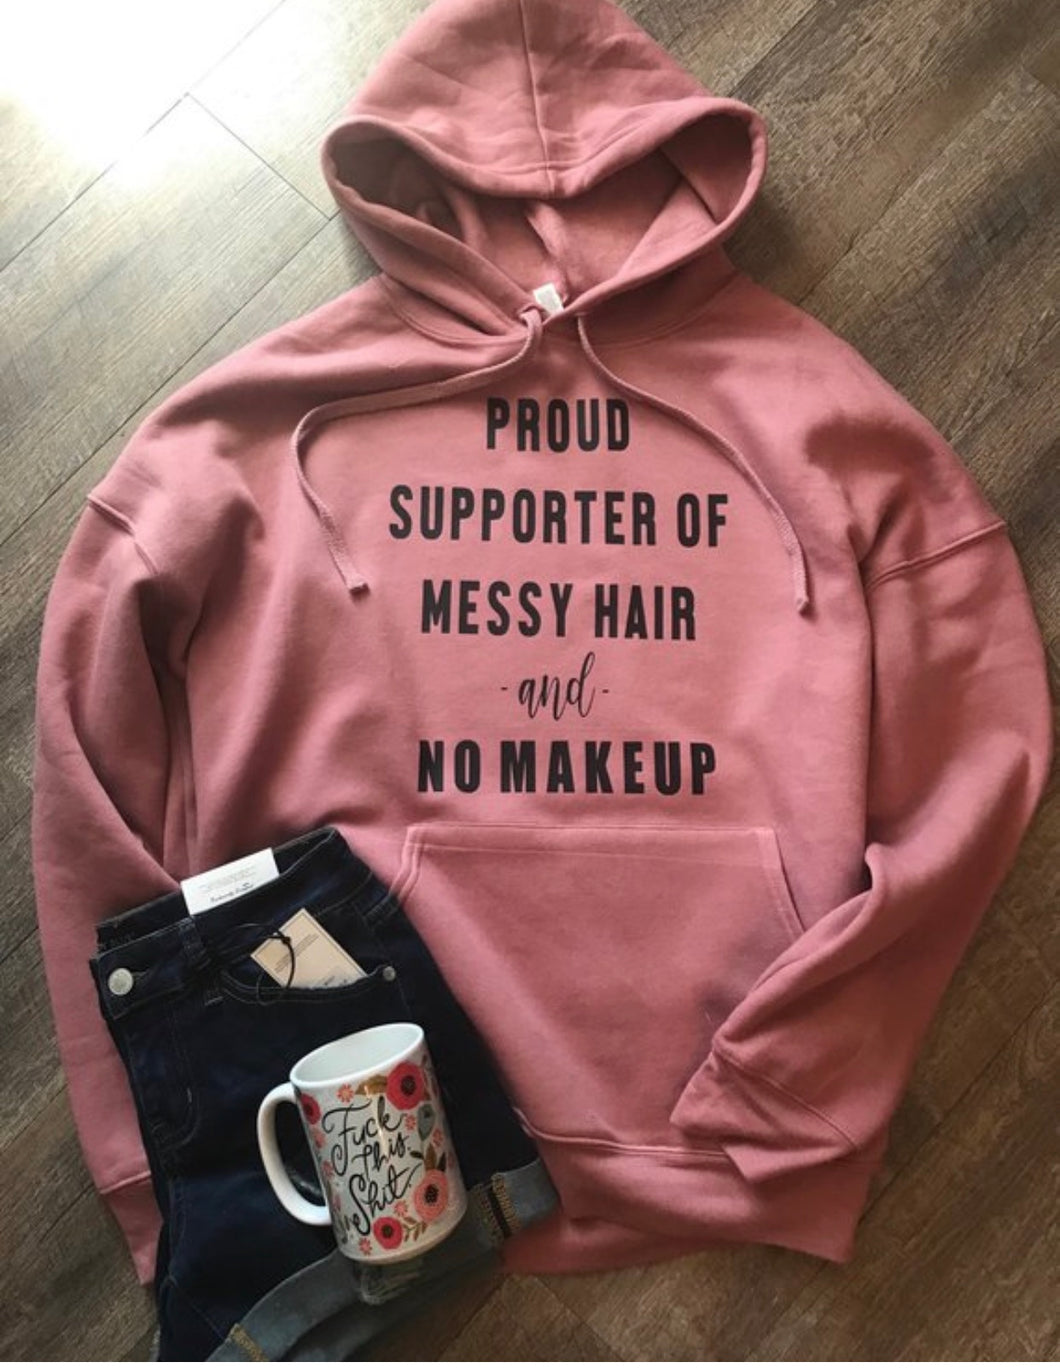 Proud Supporter of Messy Hair and No Makeup mauve bella canvas hoodie tshirt too! Funny shirt. - Mavictoria Designs Hot Press Express